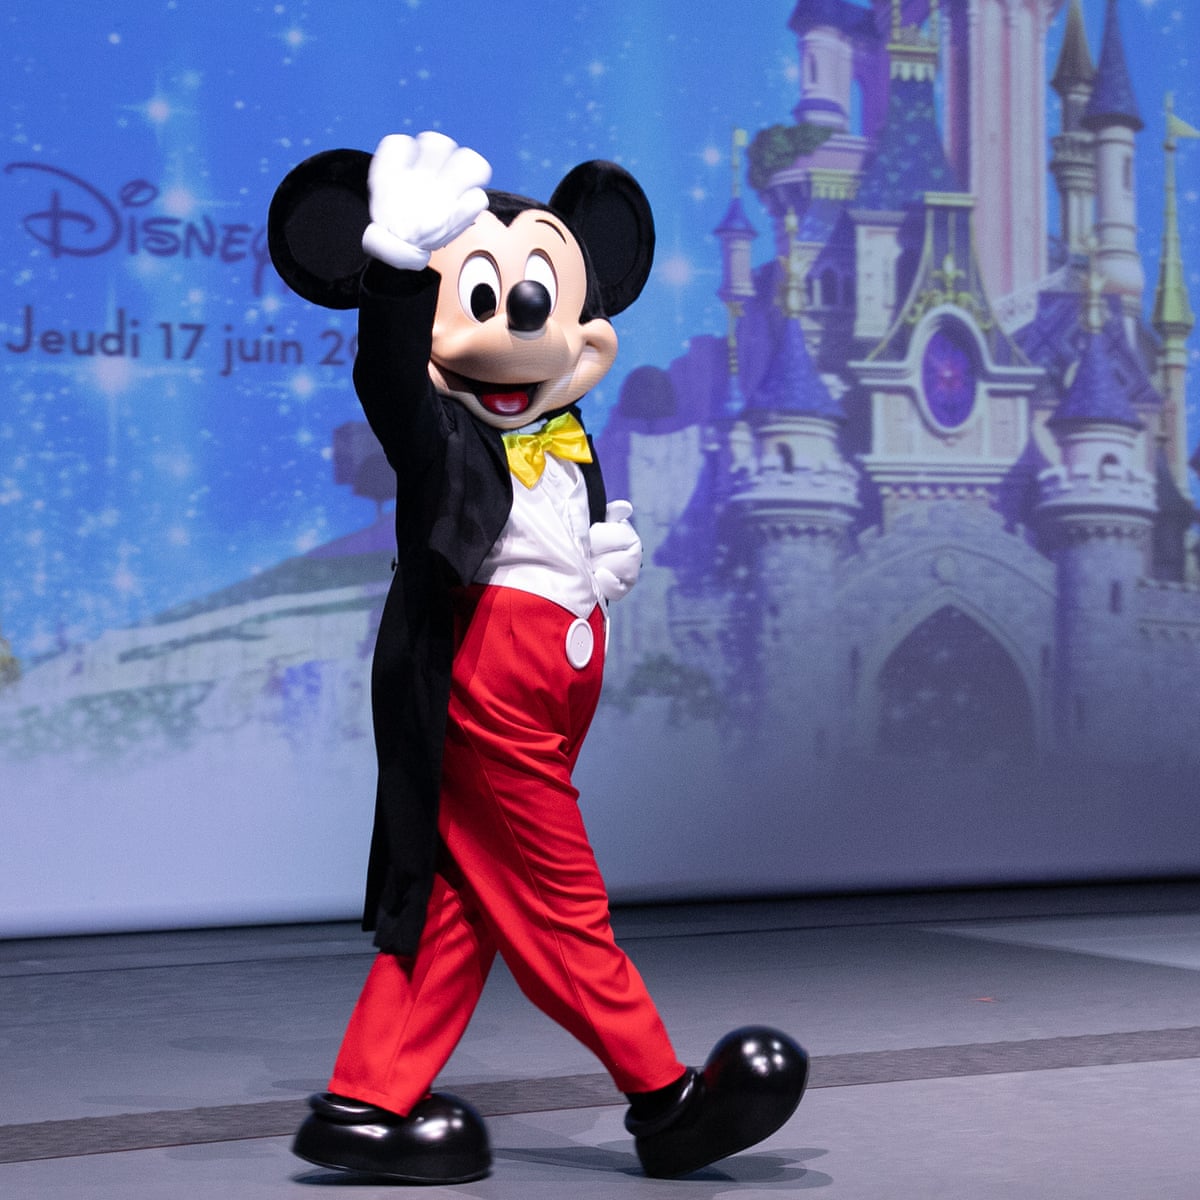 Disney could soon lose exclusive rights to Mickey Mouse | Walt ...